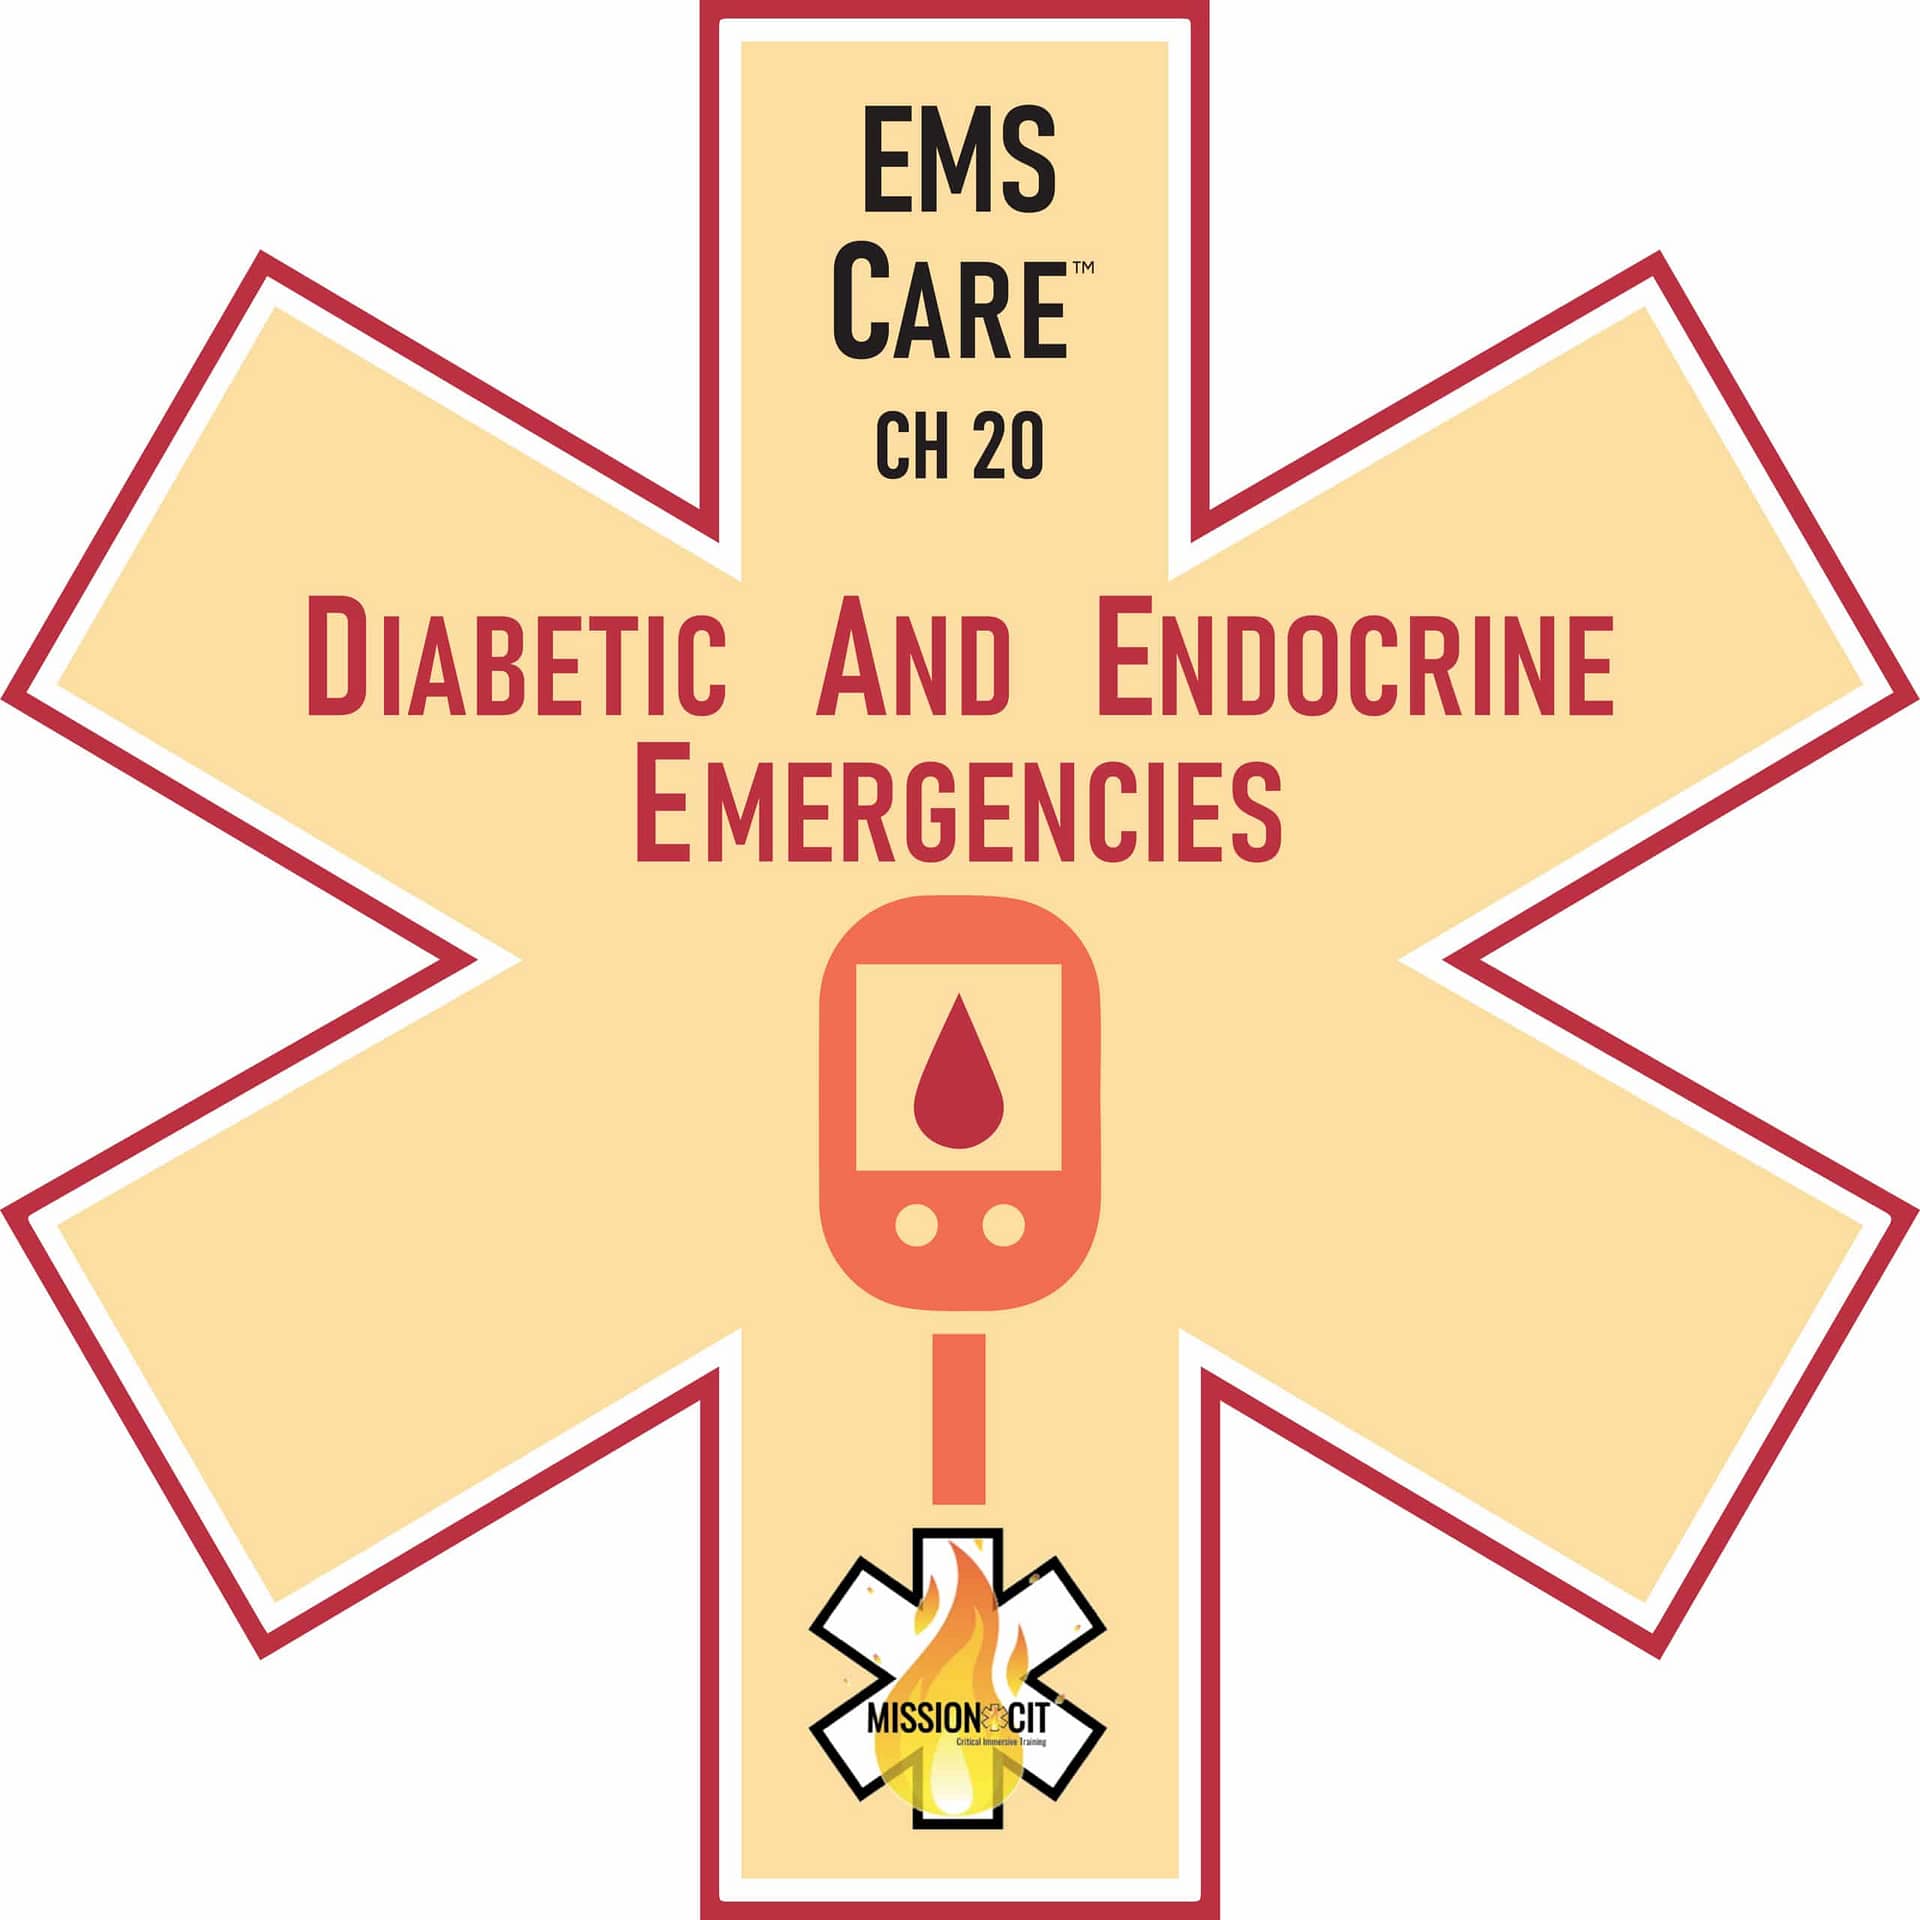 EMS Care Chapter 20 | Diabetic and endocrine emergencies